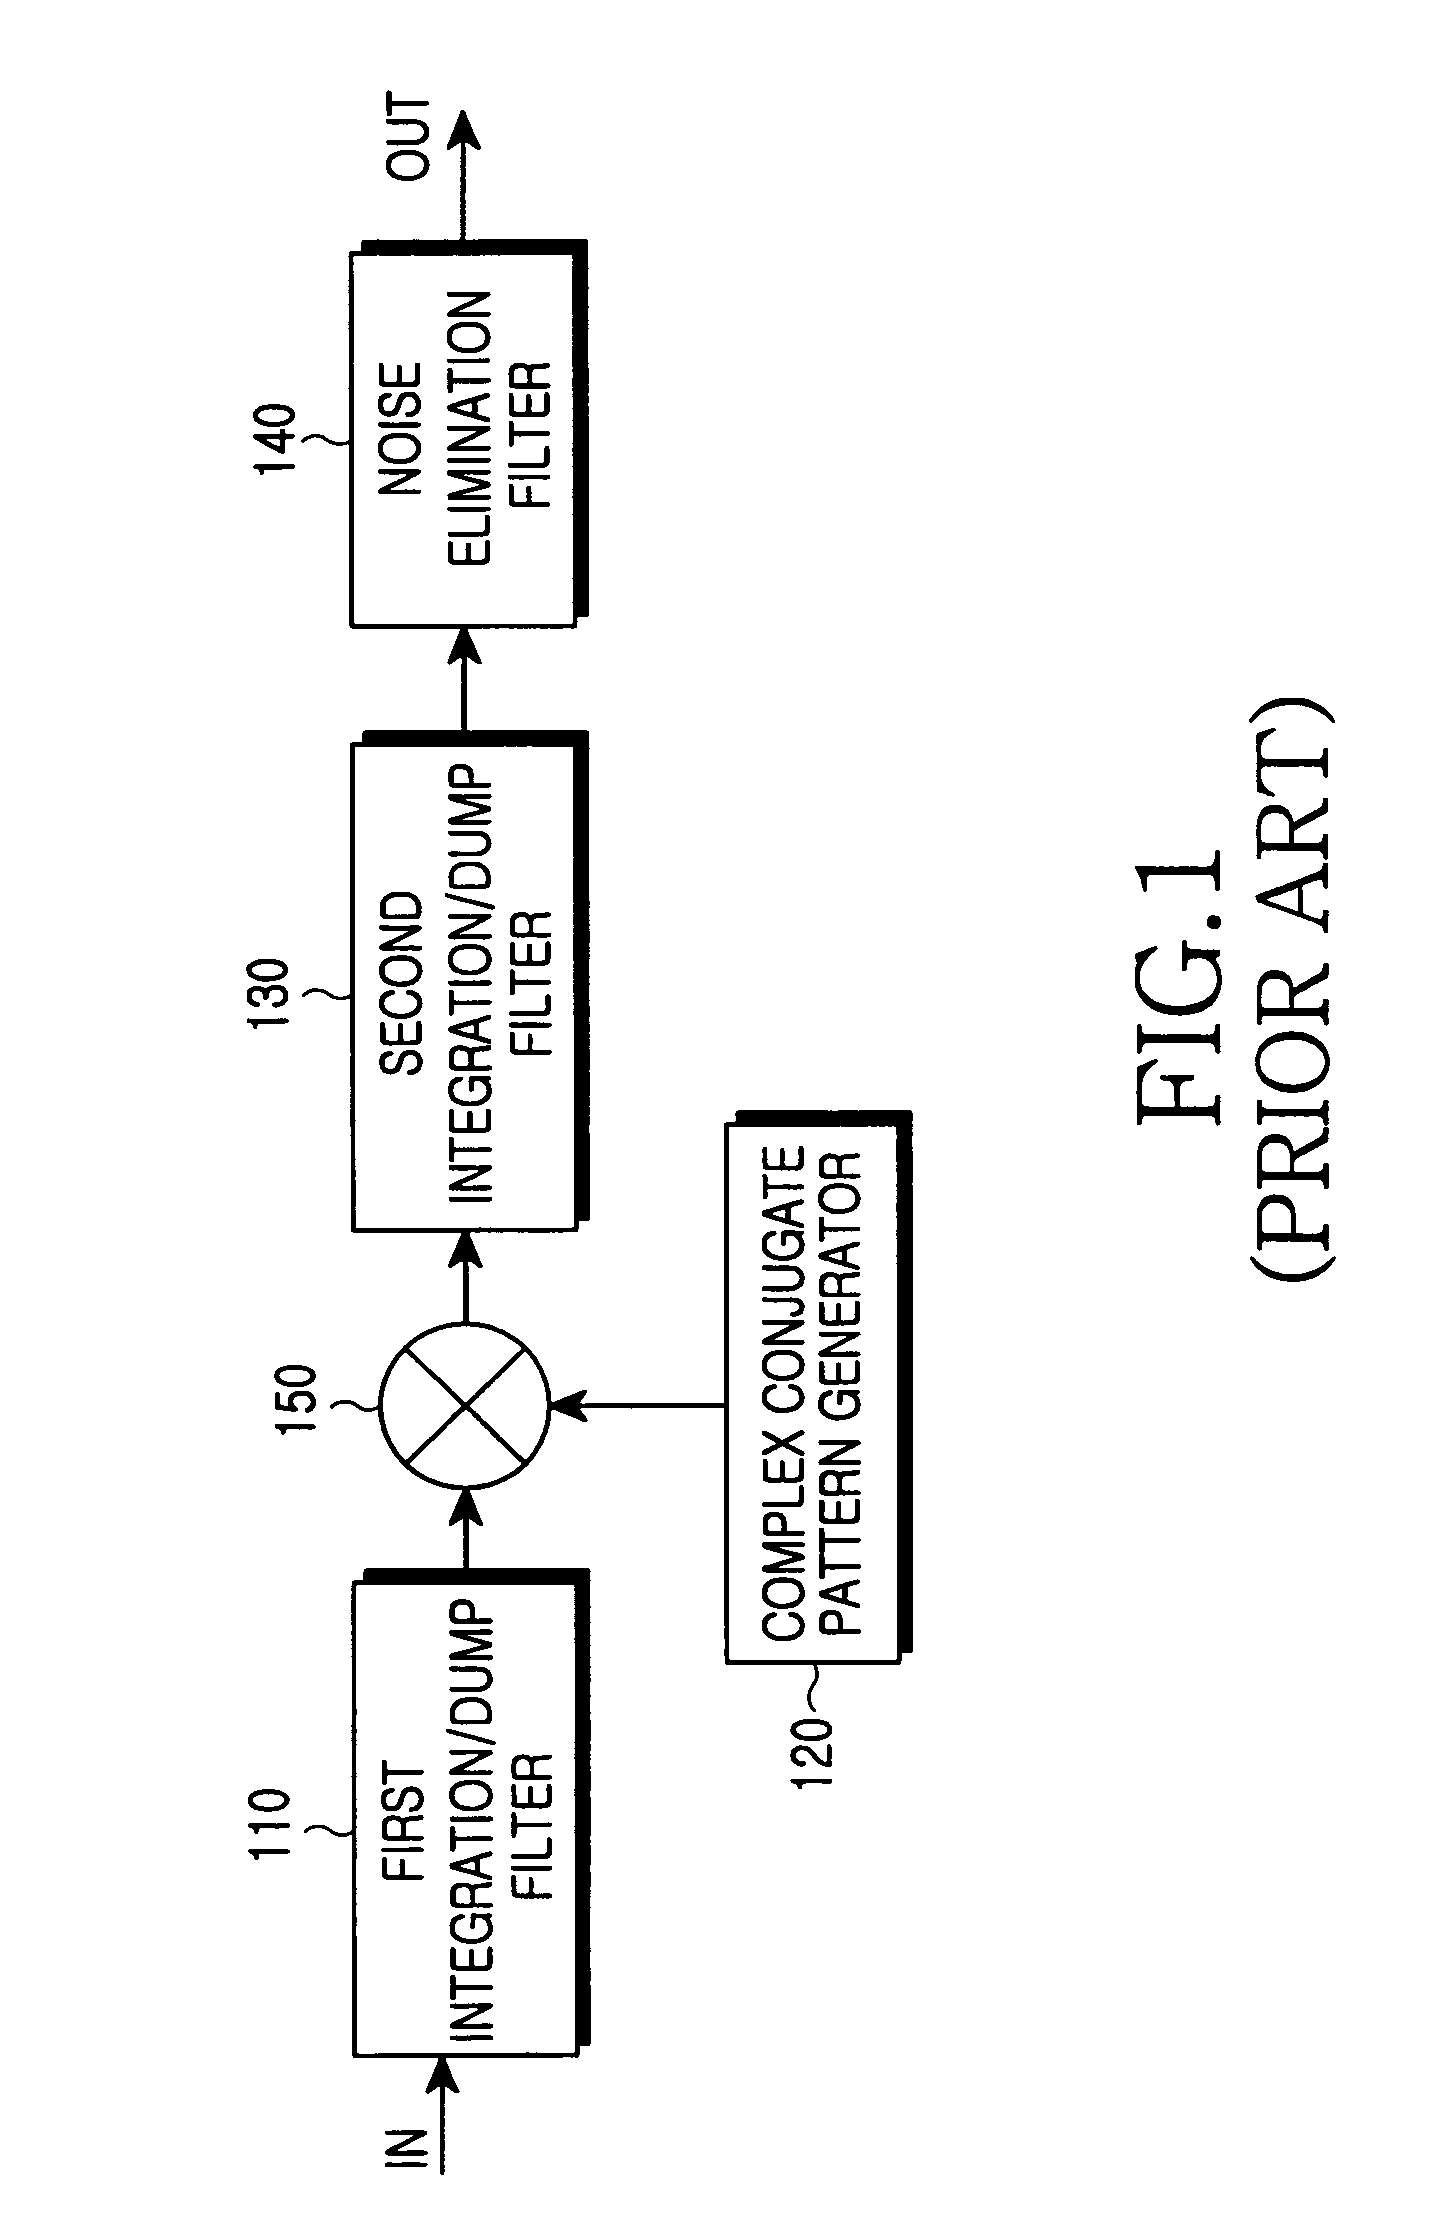 Apparatus and method for performing adaptive channel estimation in a mobile communication system